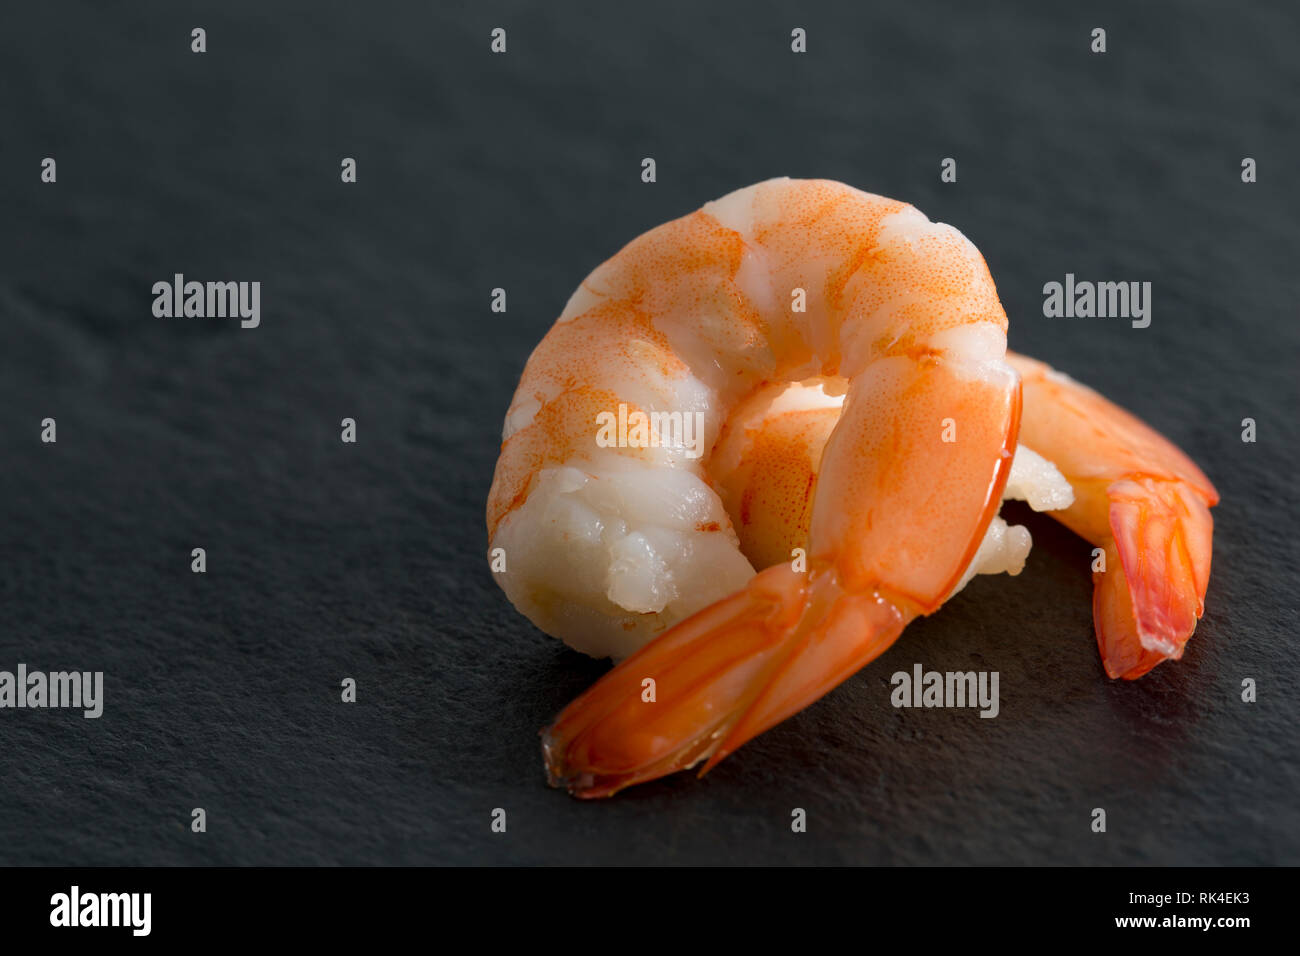 Farmed, cooked jumbo king prawns, Litopenaeus vannamei, bought from a supermarket in the UK and imported from the Far East. England UK GB. Photographe Stock Photo